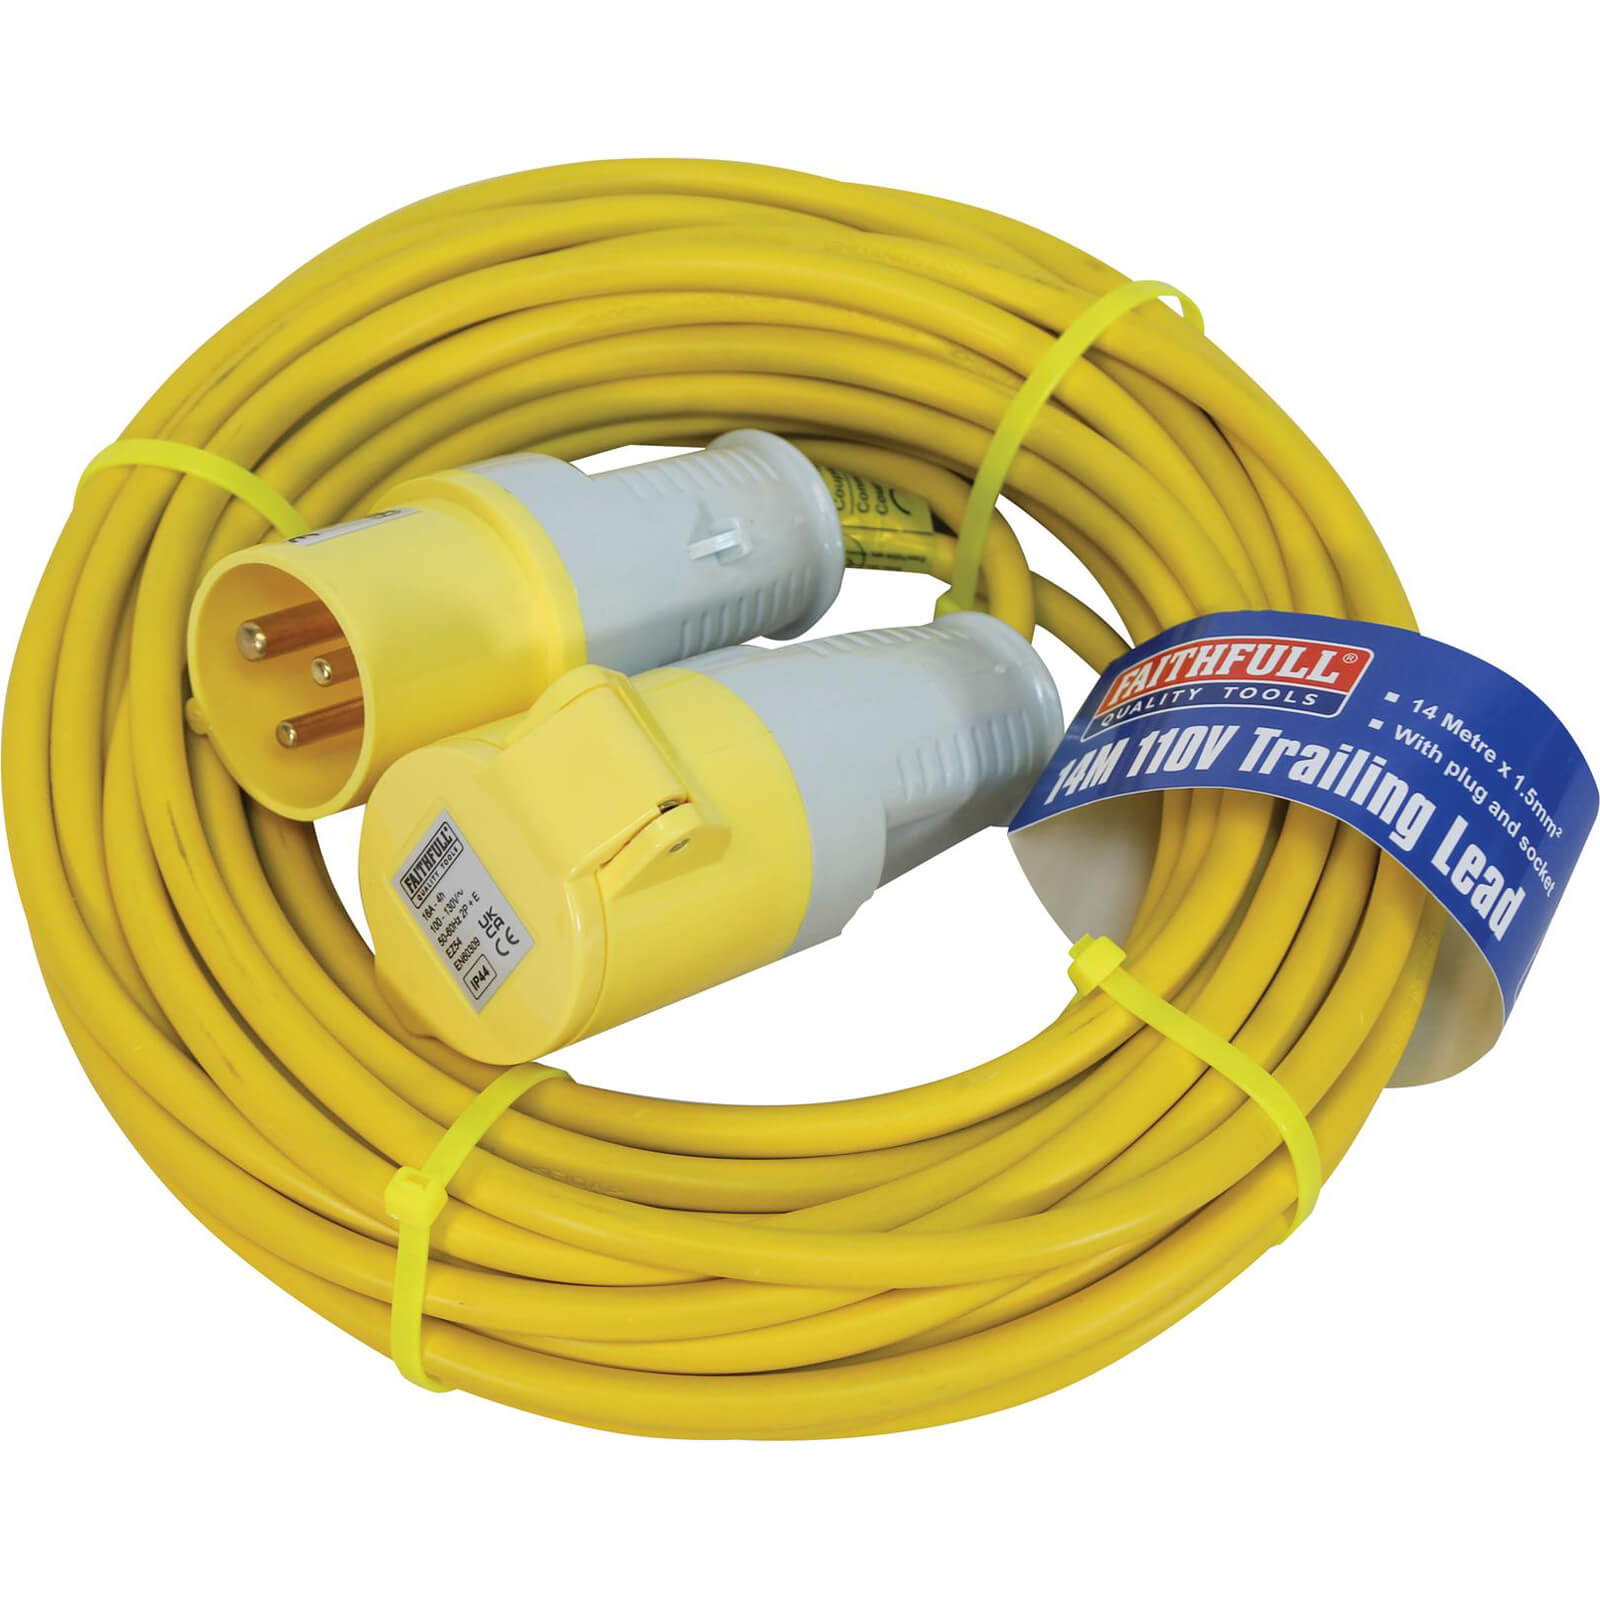 Faithfull Extension Trailing Lead 16 amp Yellow Cable 110v 14m